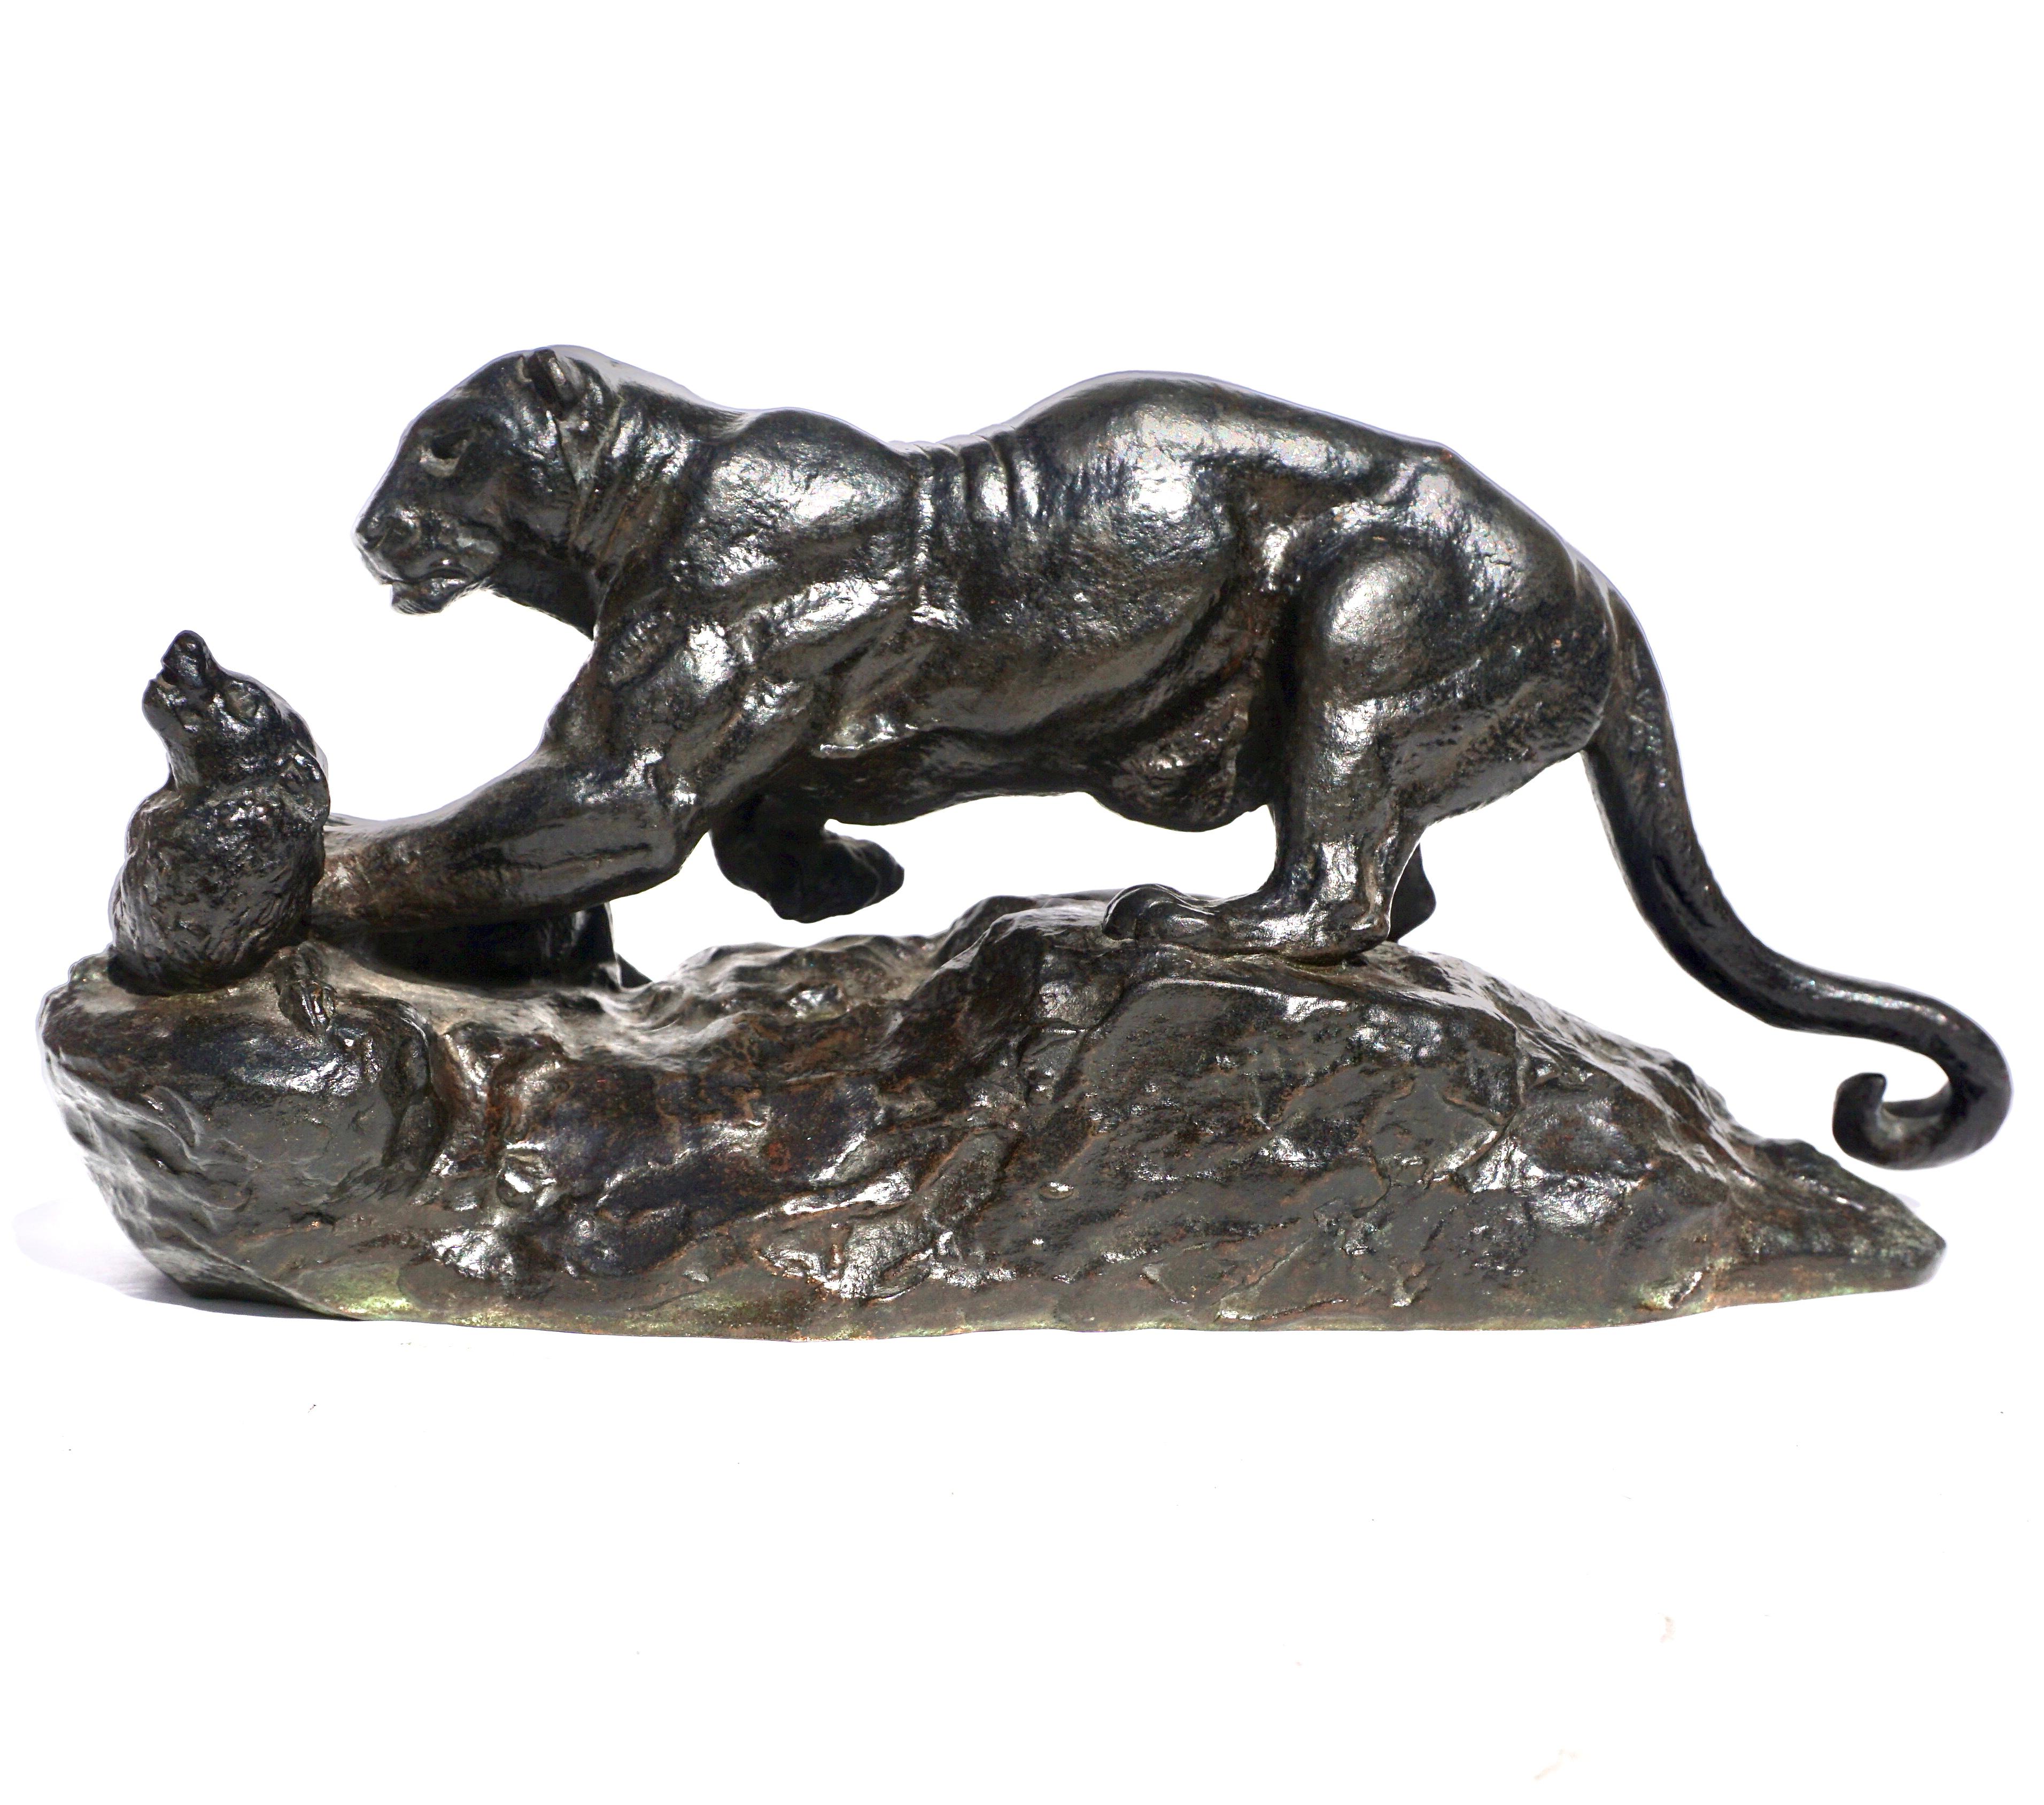 ANTOINE-LOUIS BARYE (FRENCH, 1795-1875) 
Panthère surprenant un zibeth, seconde version (Panther attacking a civet cat, second version)
signed BARYE 
bronze, dark-brown patina with rust highlights 

Length: 9.25 Inches (23.5 cm)
Height:4.25